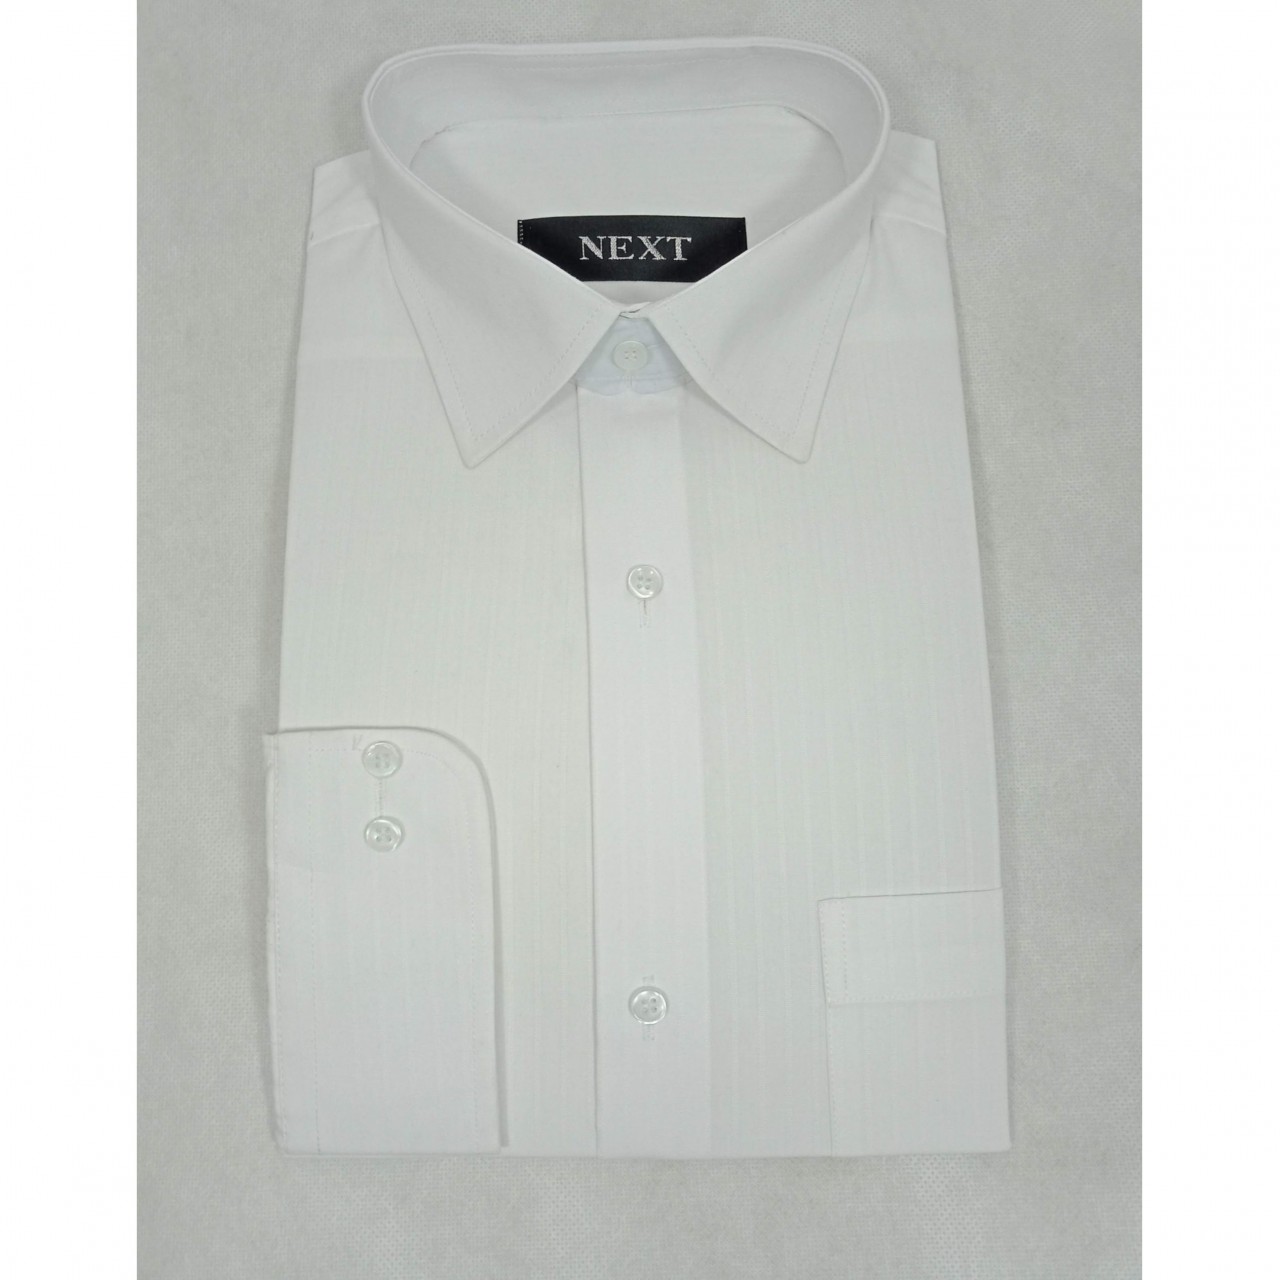 White Formal Shirt For Men - Self Lining - Double Needle Stitching